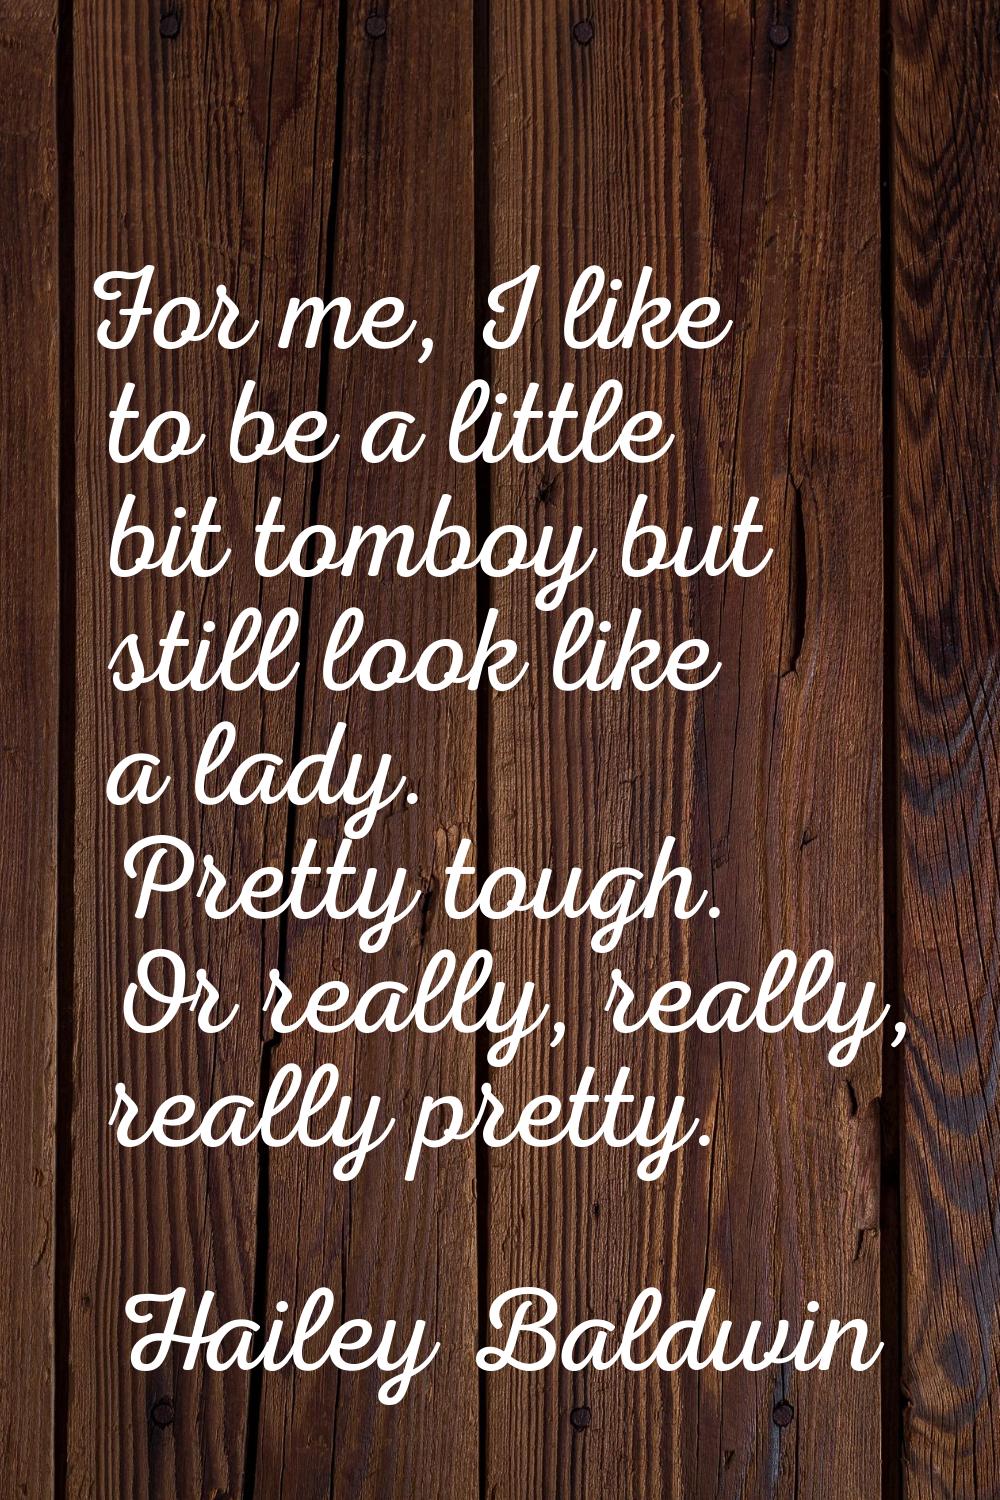 For me, I like to be a little bit tomboy but still look like a lady. Pretty tough. Or really, reall